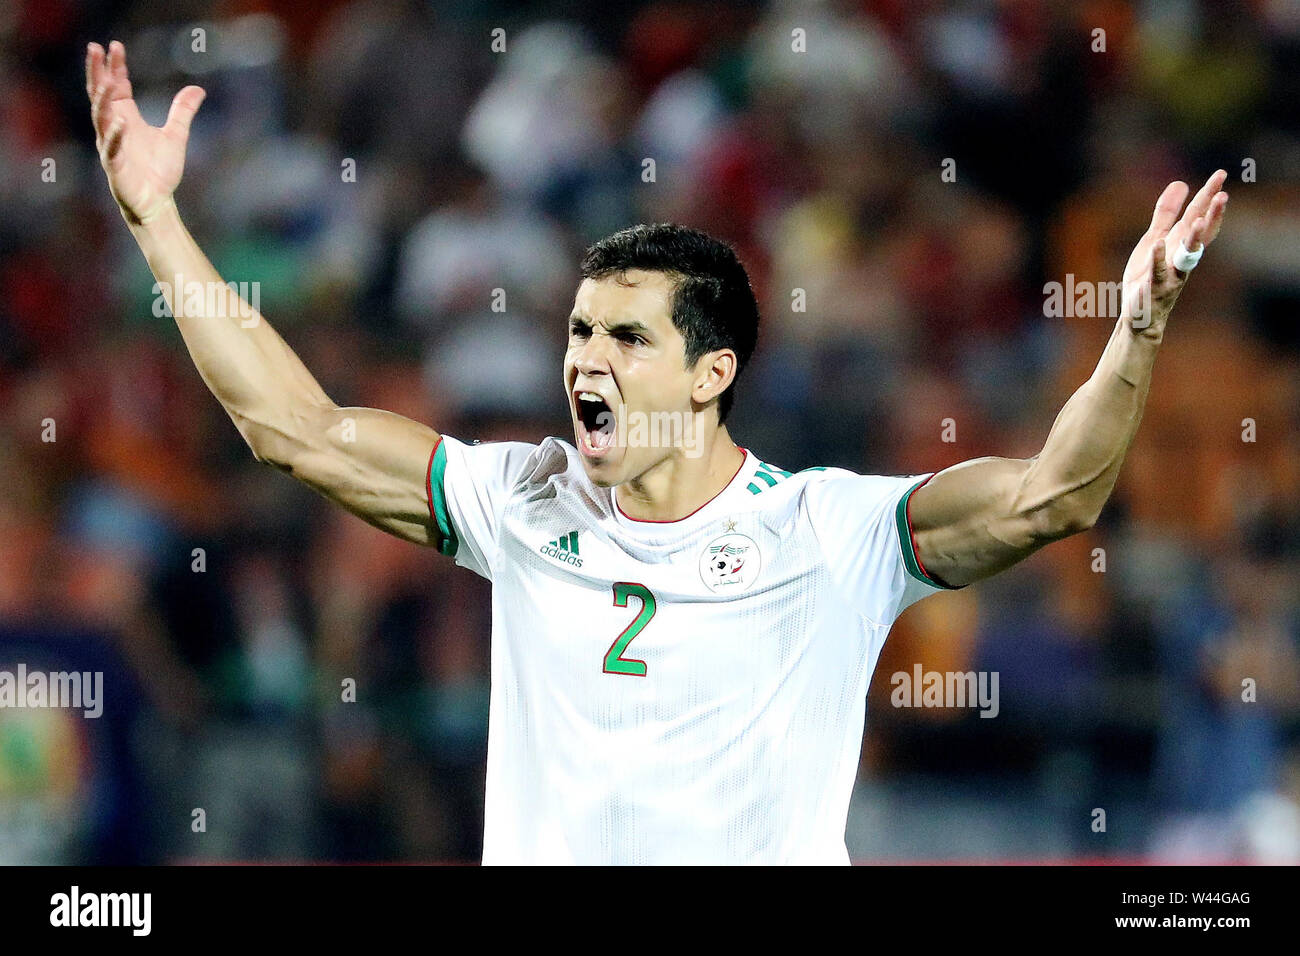 Cairo. 19th July, 2019. Aissa Mandi of Algeria reacts during the 2019 Africa Cup of Nations final match between Senegal and Algeria in Cairo, Egypt on July 19, 2019. Algeria won 1-0 and claimed the title. Credit: Wang Teng/Xinhua/Alamy Live News Stock Photo